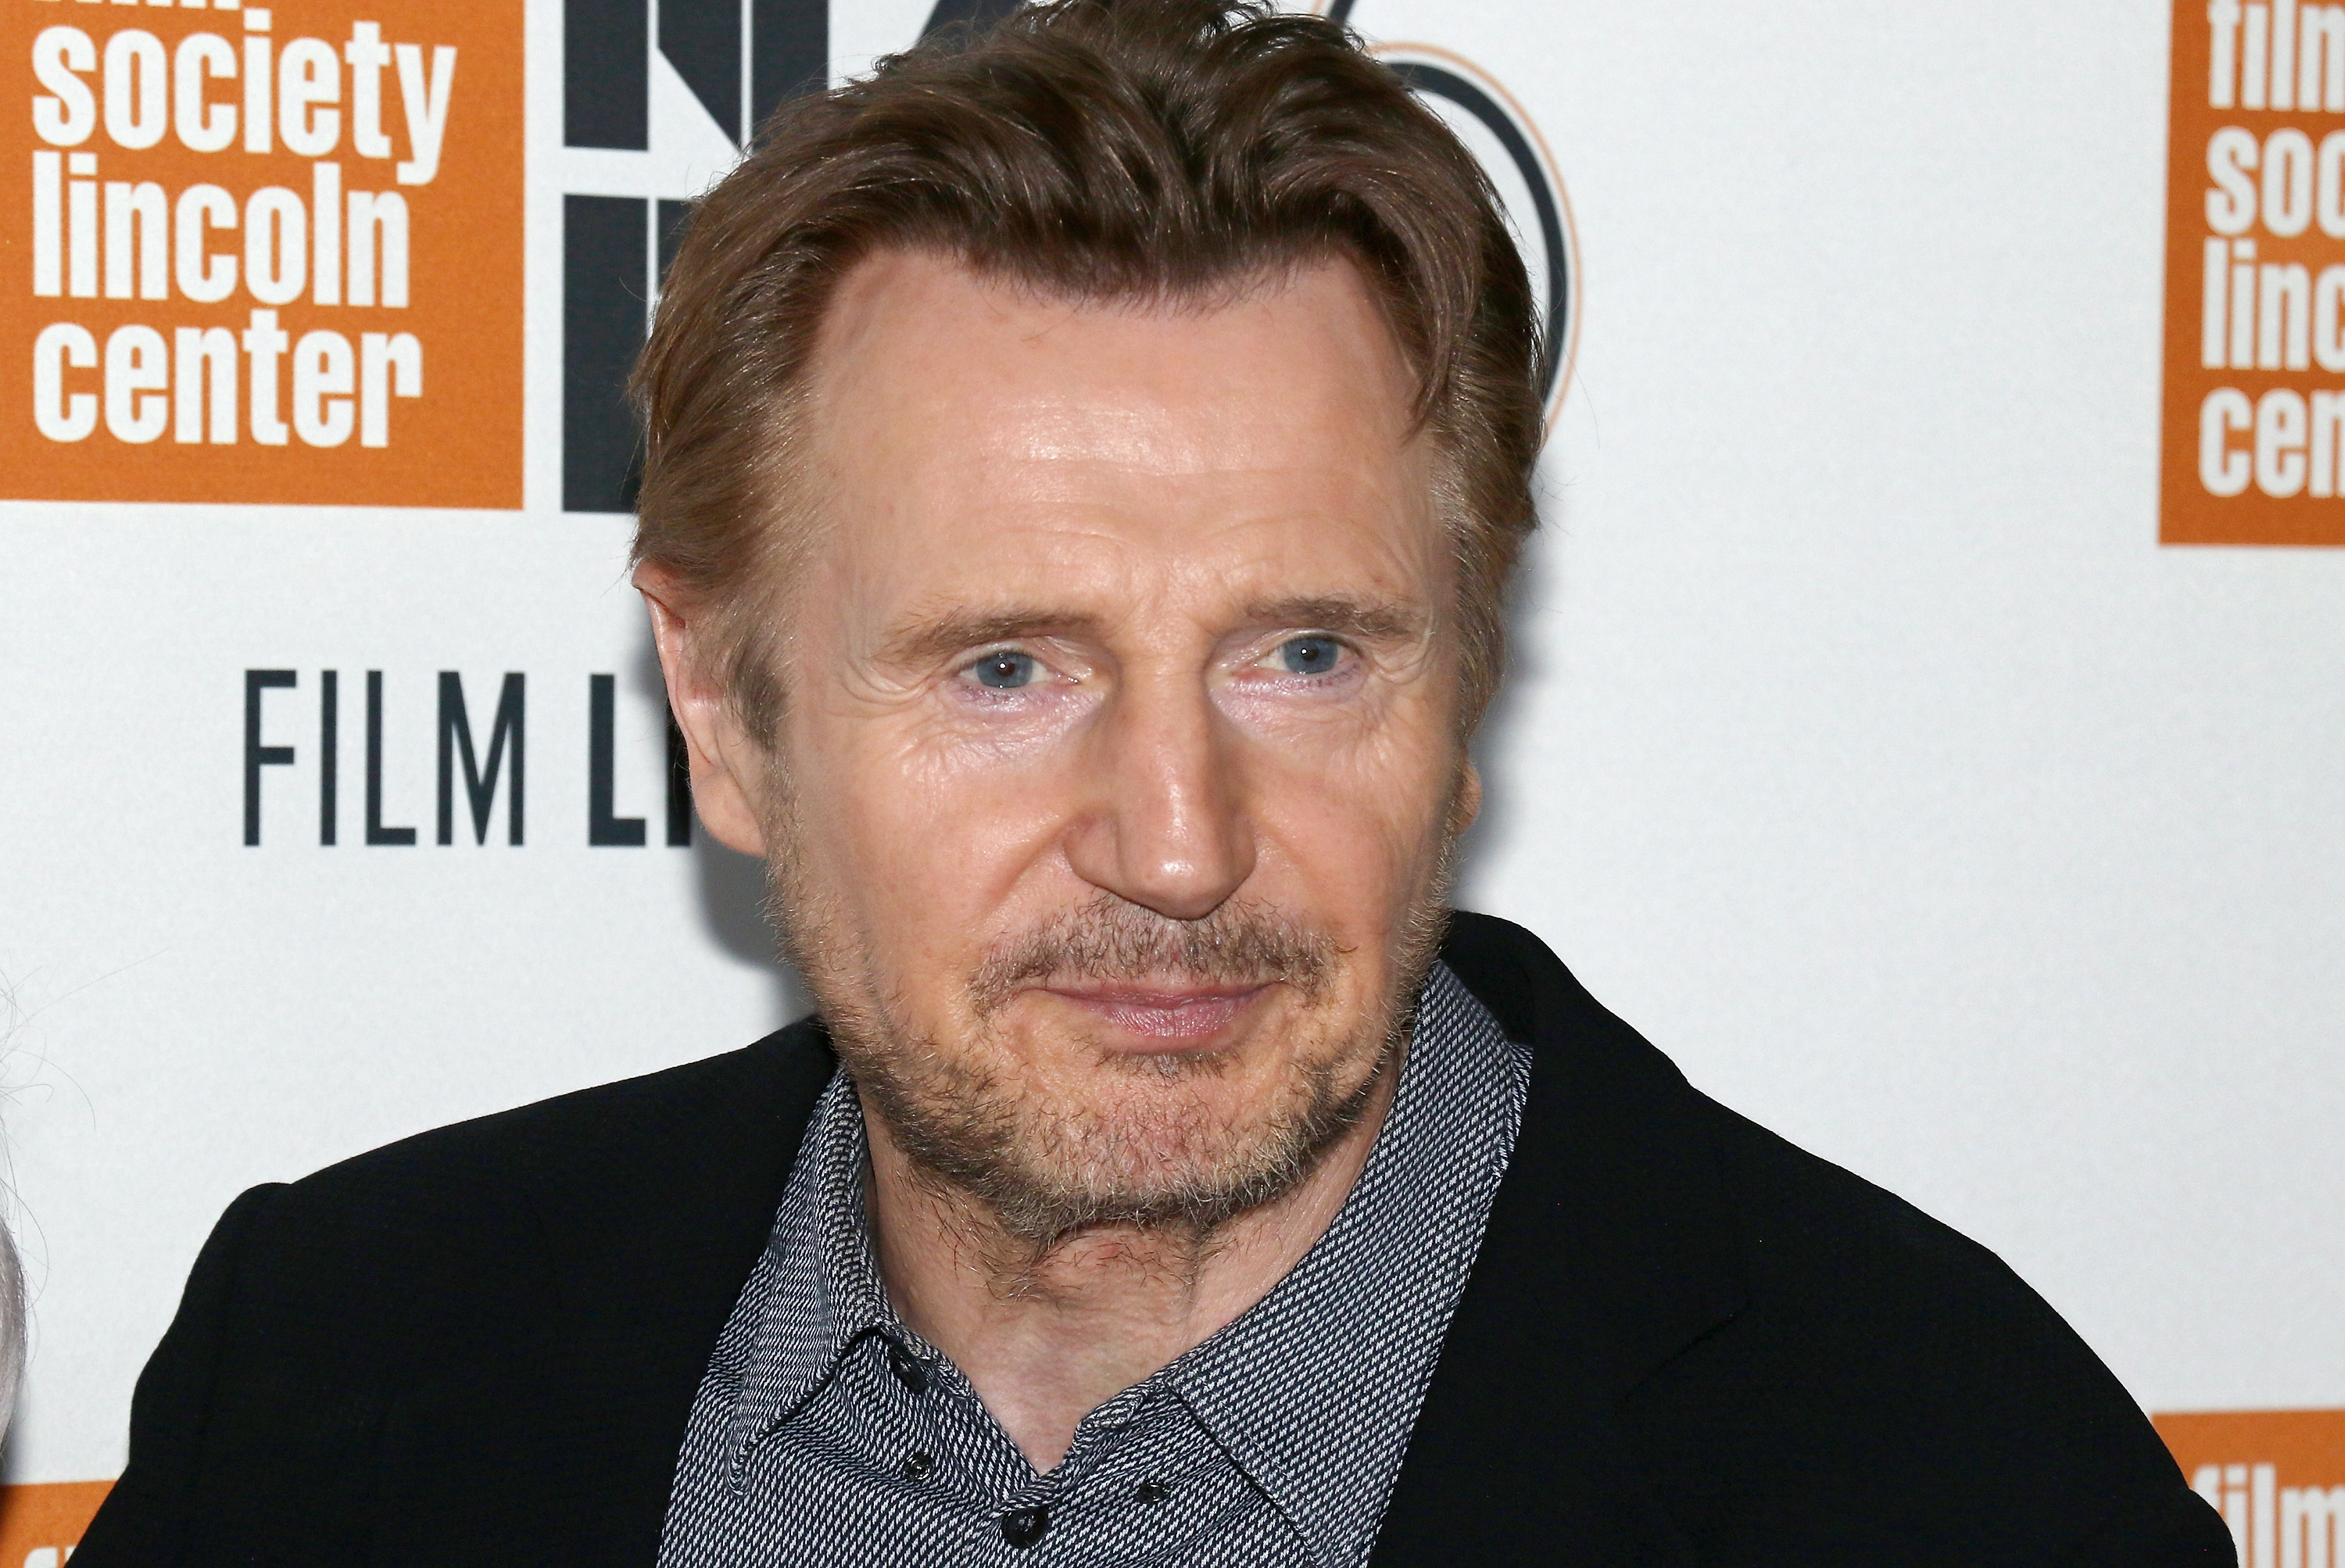 Star Wars actor Liam Neeson attends the New York Film Festival for The Ballad of Buster Scruggs